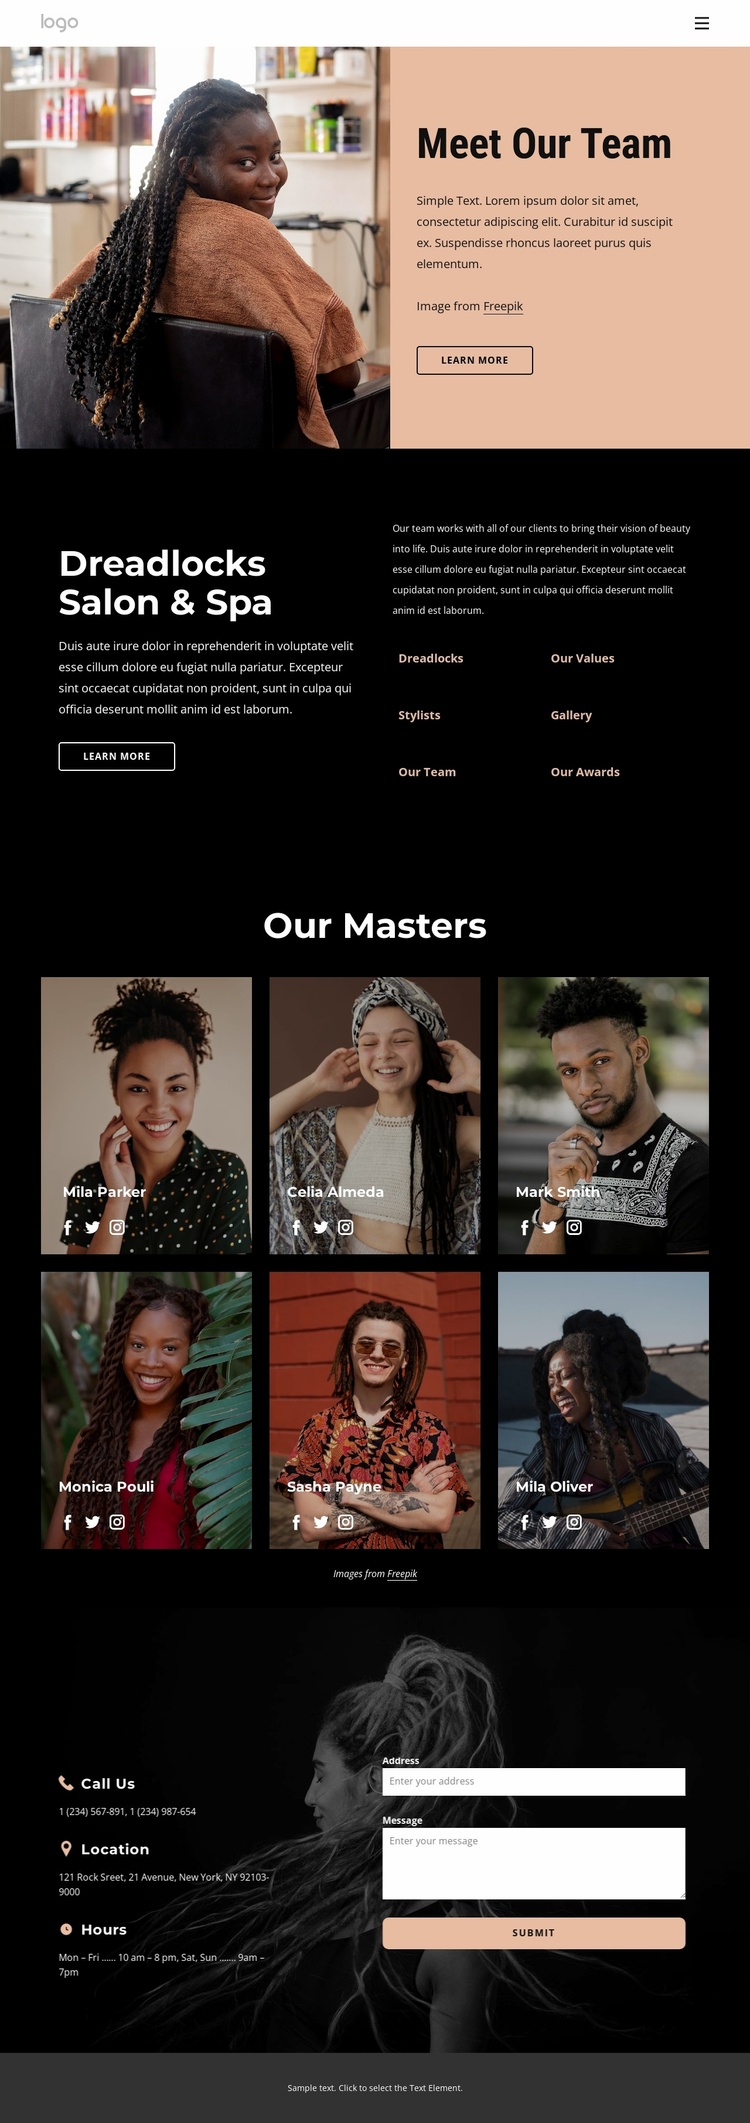 Meet our masters Website Template